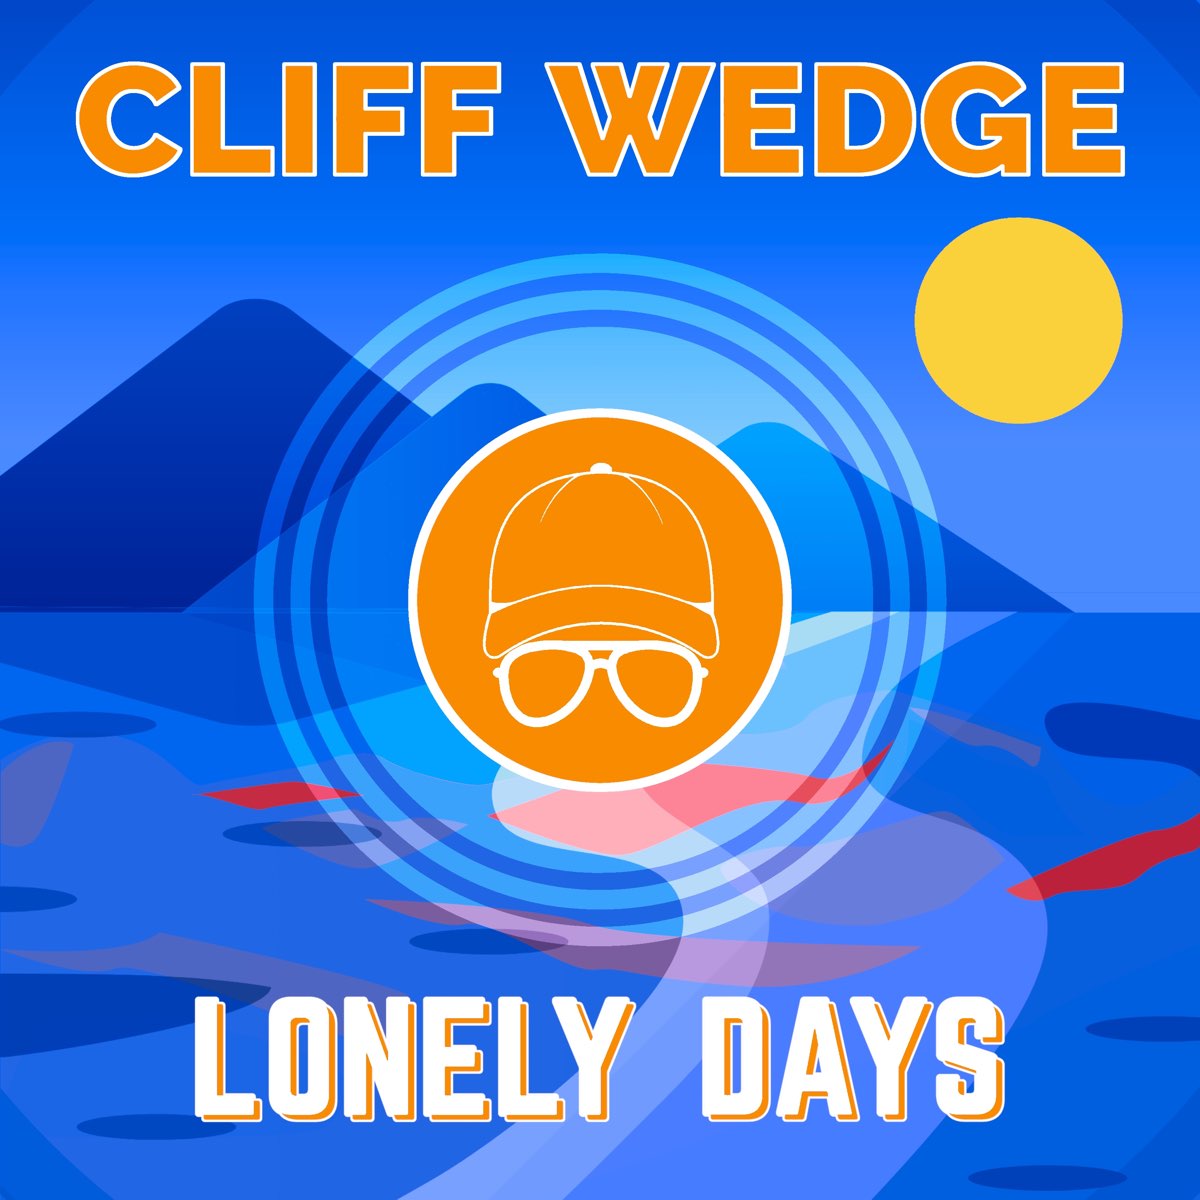 I wanna know cliff wedge. Cliff Wedge. Cliff Wedge Touch me (Extended). Cliff Wedge - Angel Eyes (Extended). Cliff Wedge feat. Vasso - Angel Eyes.